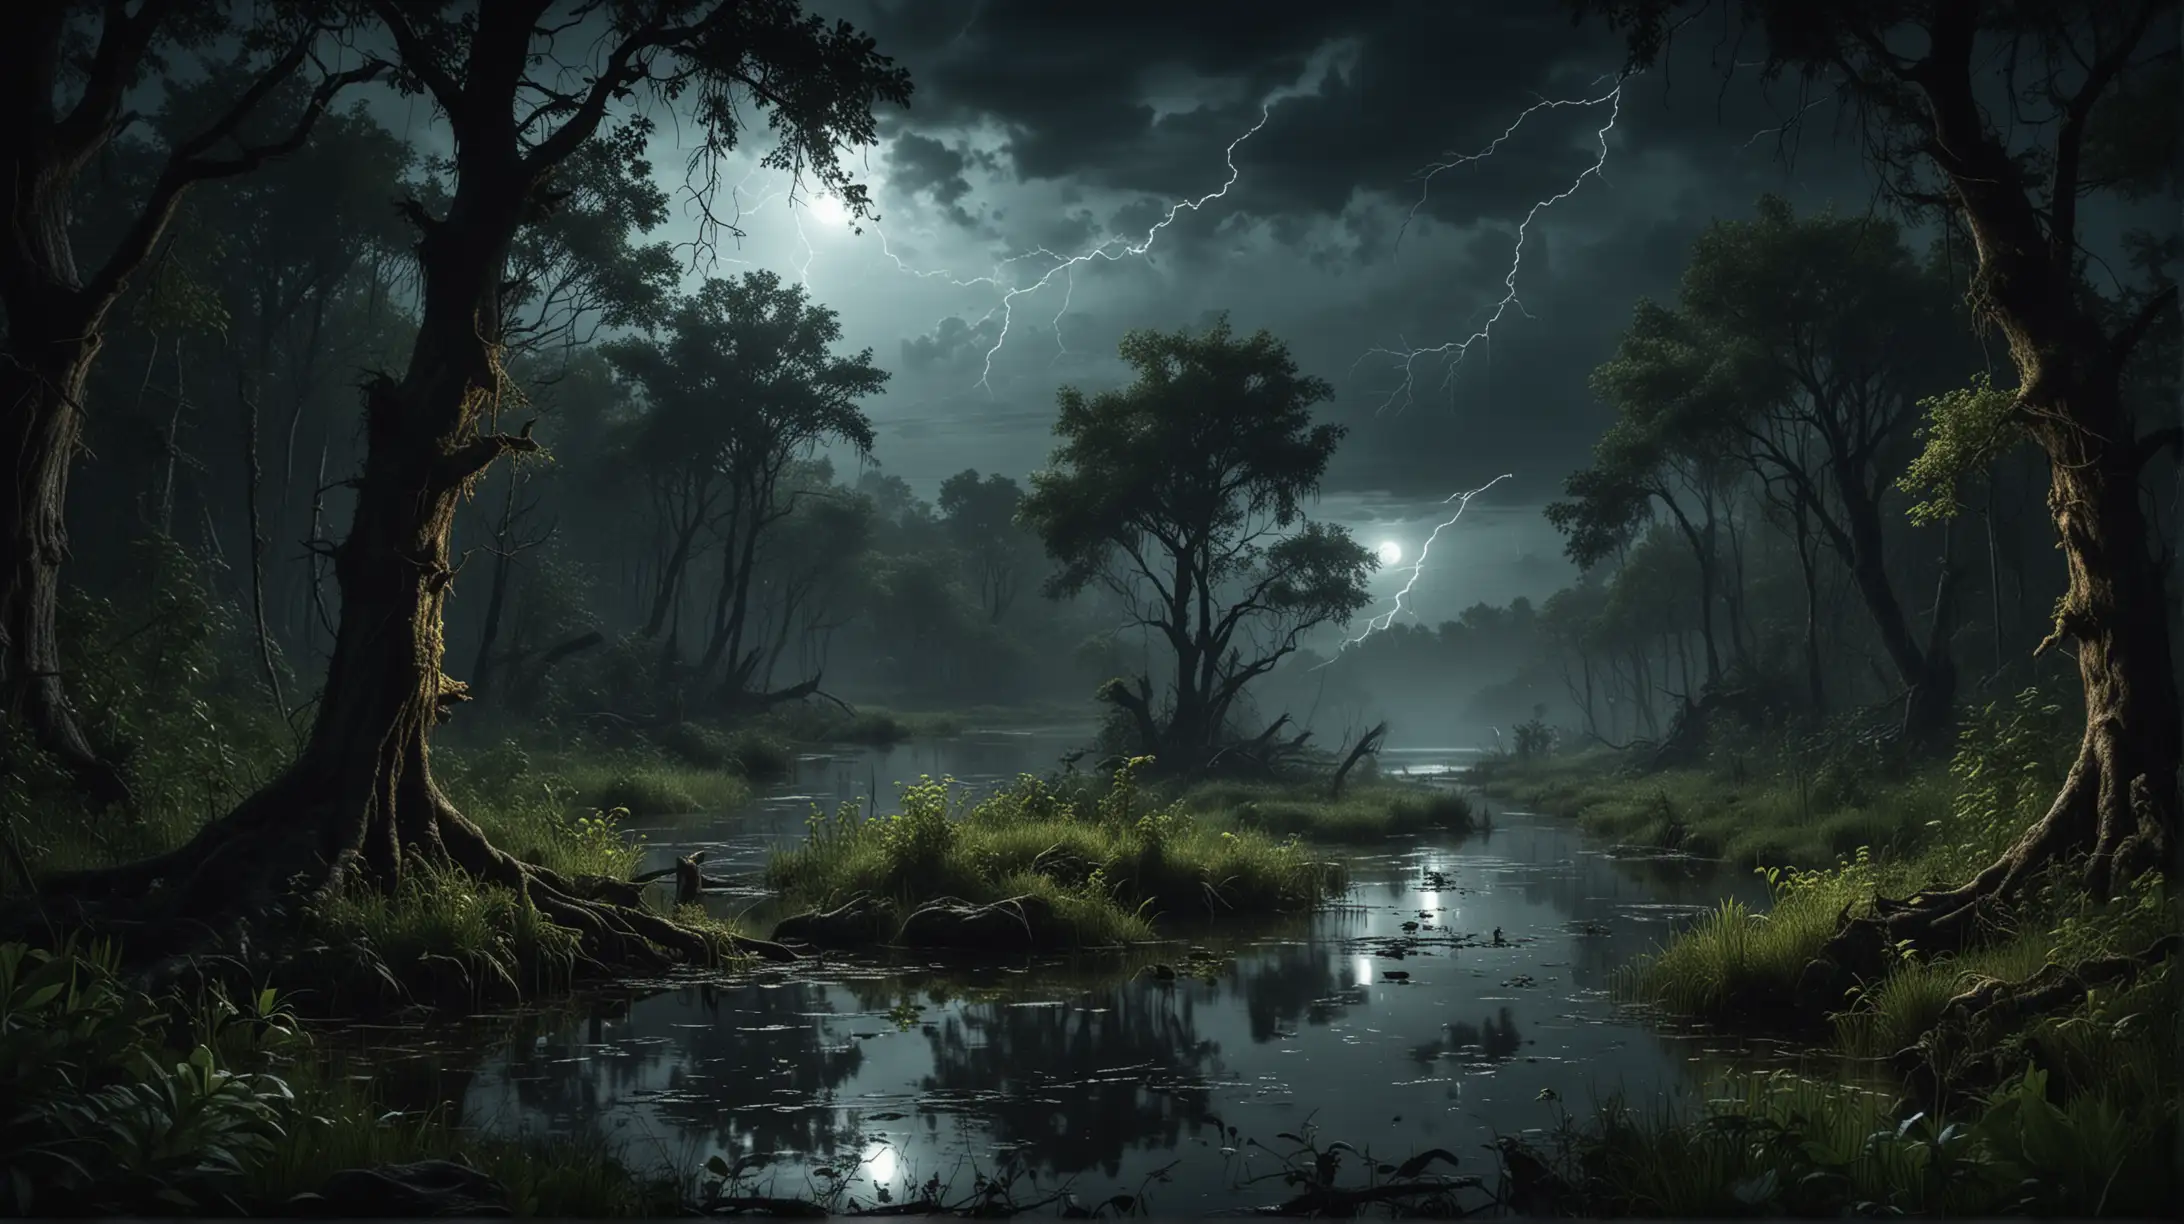 Dark Forest with River and Swamp Plants at Night